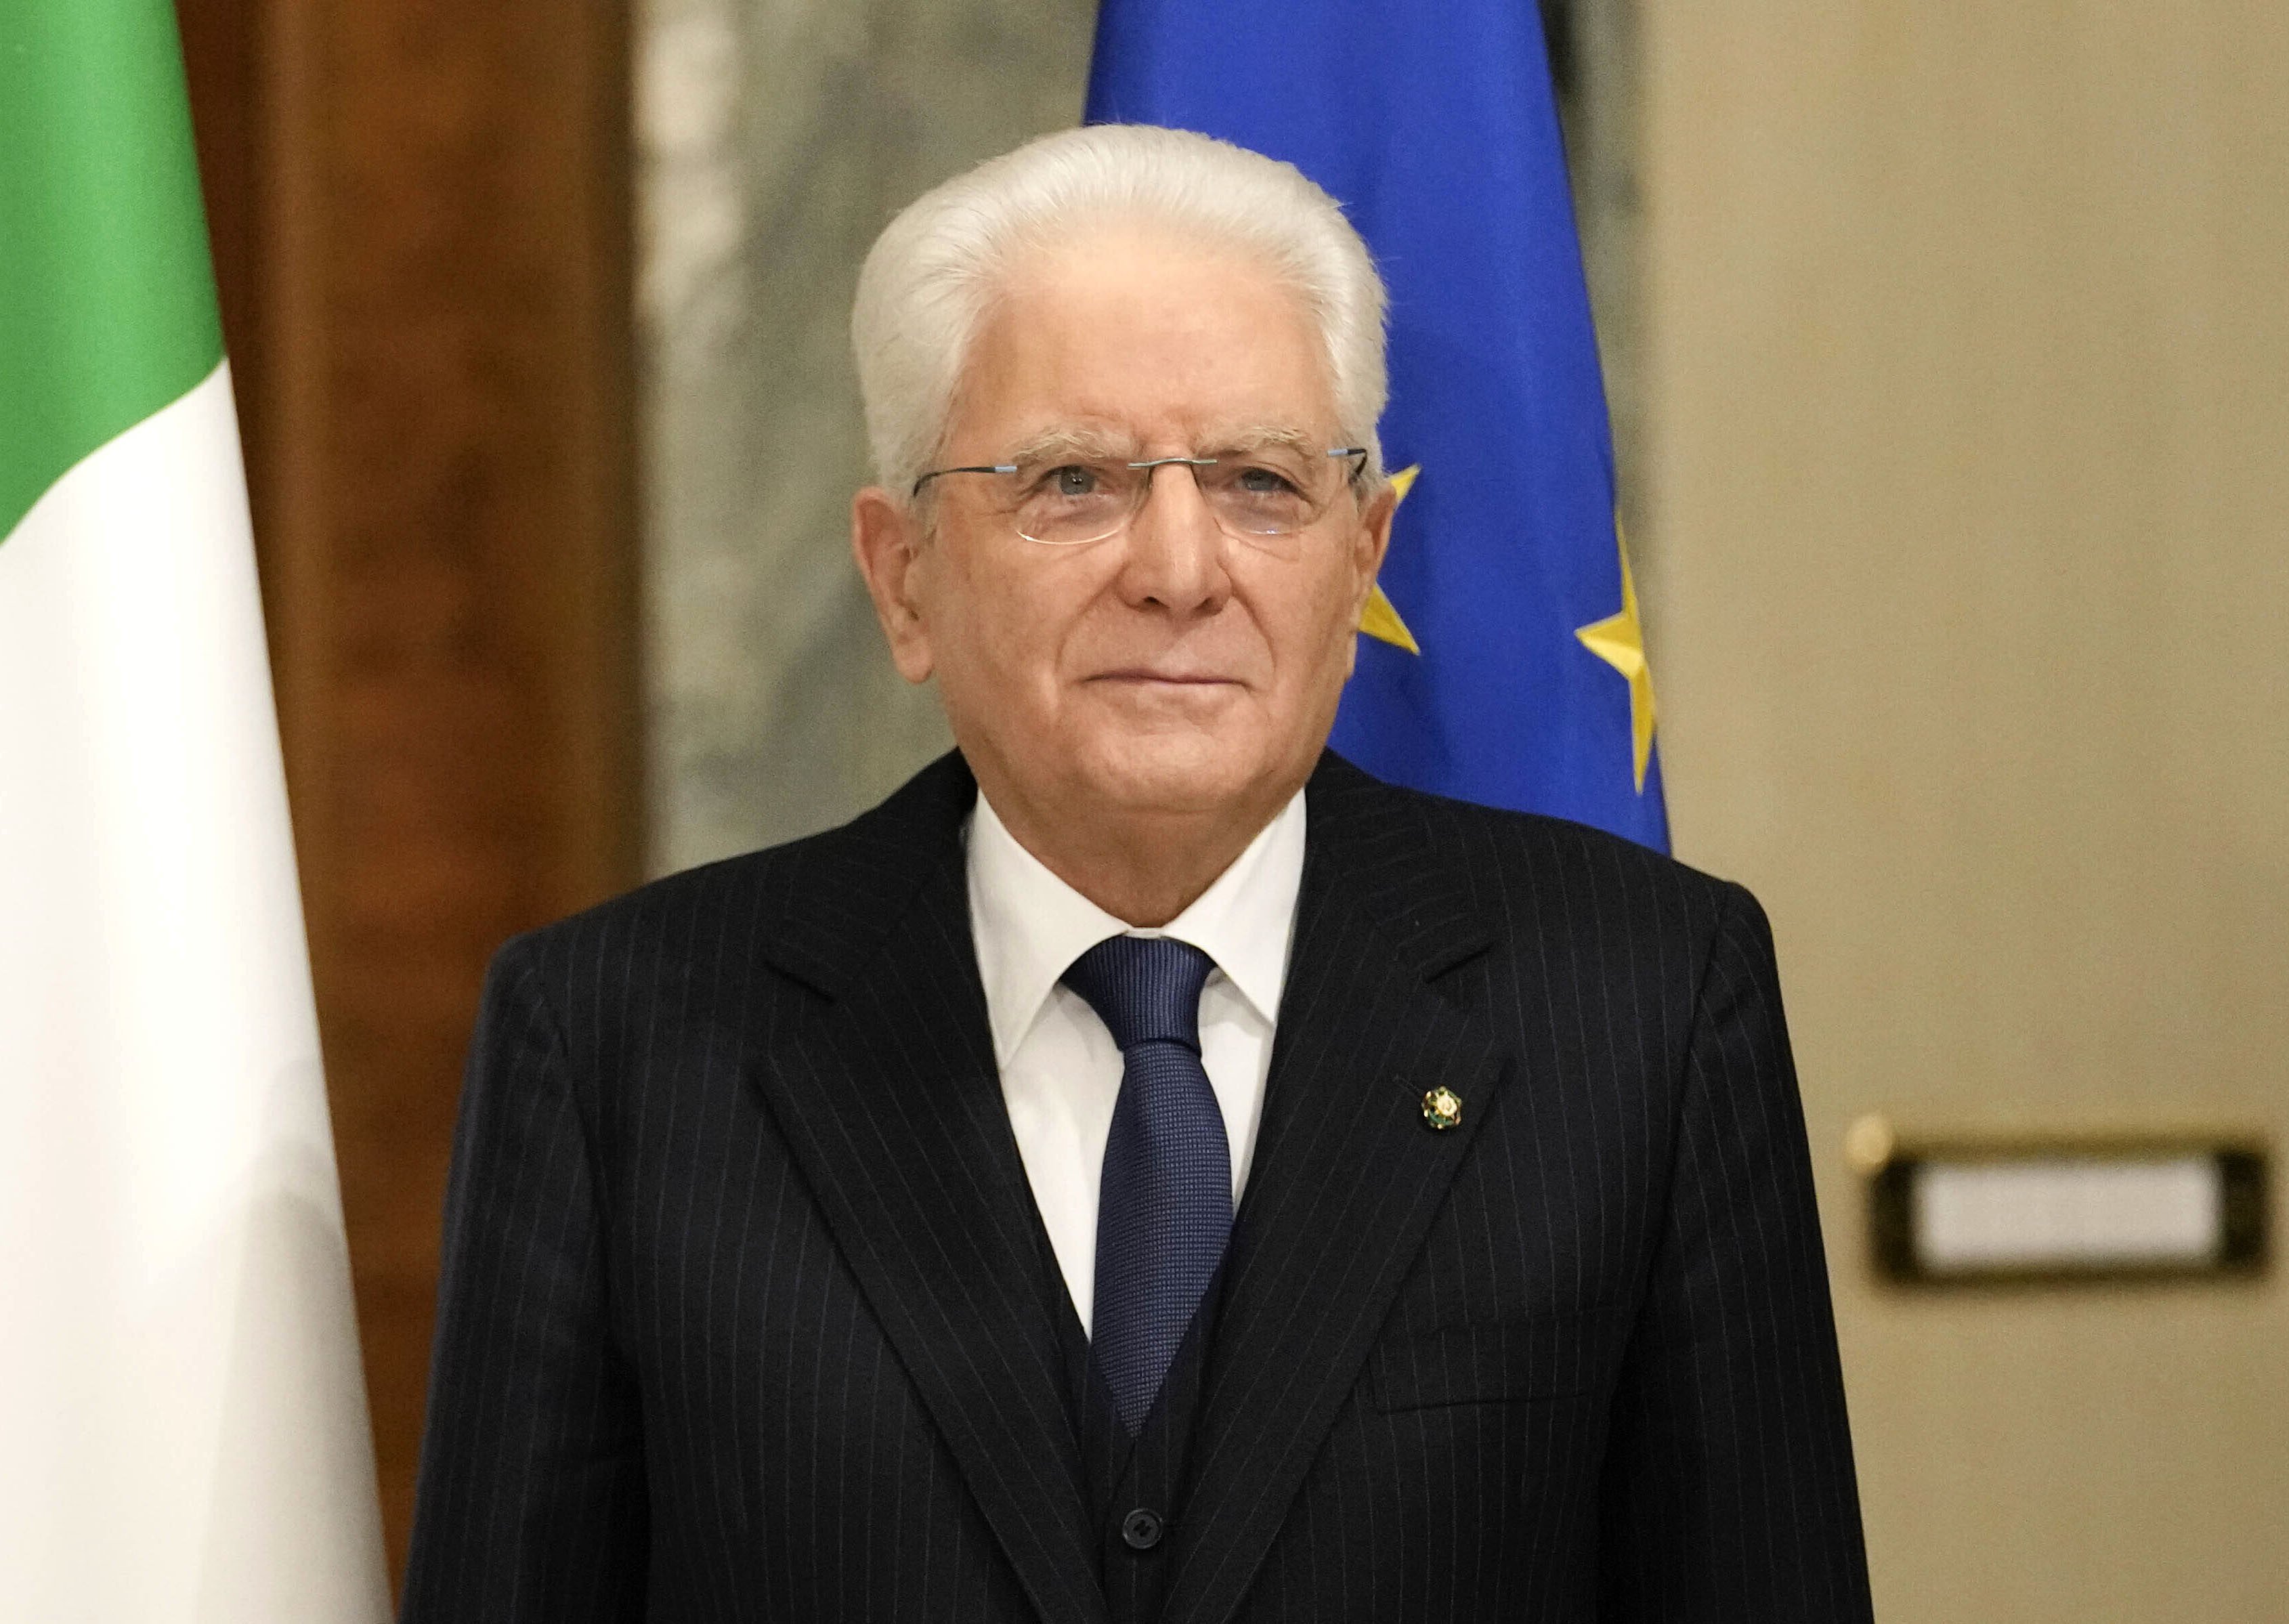 Italian President Sergio Mattarella has agreed to stay on for a second term. Photo: AP